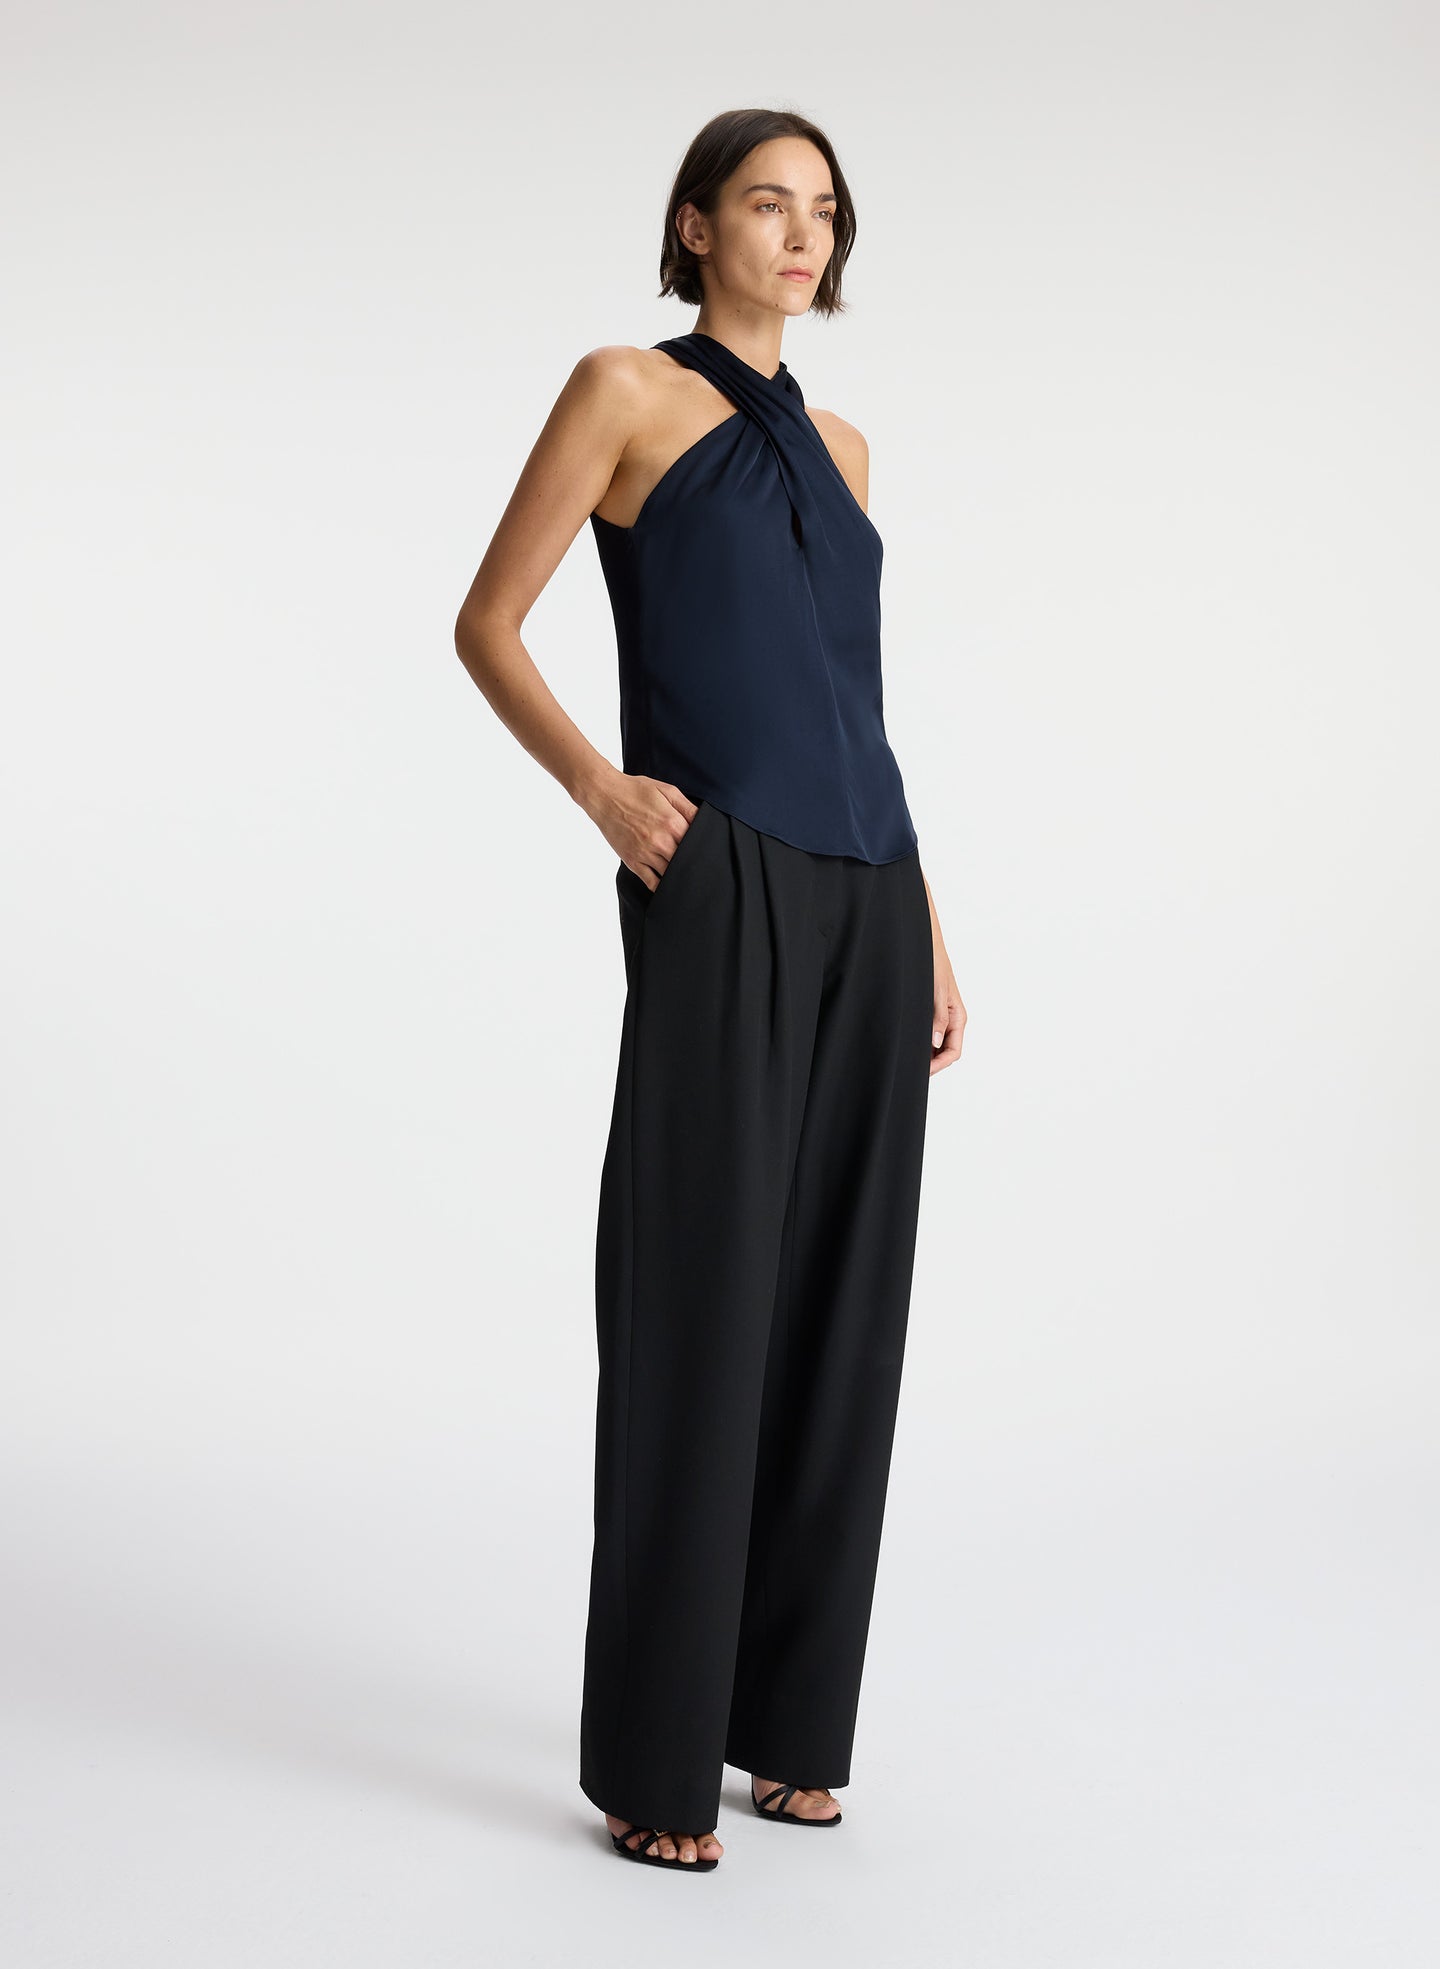 side view of woman wearing navy blue satin halter top with black pants